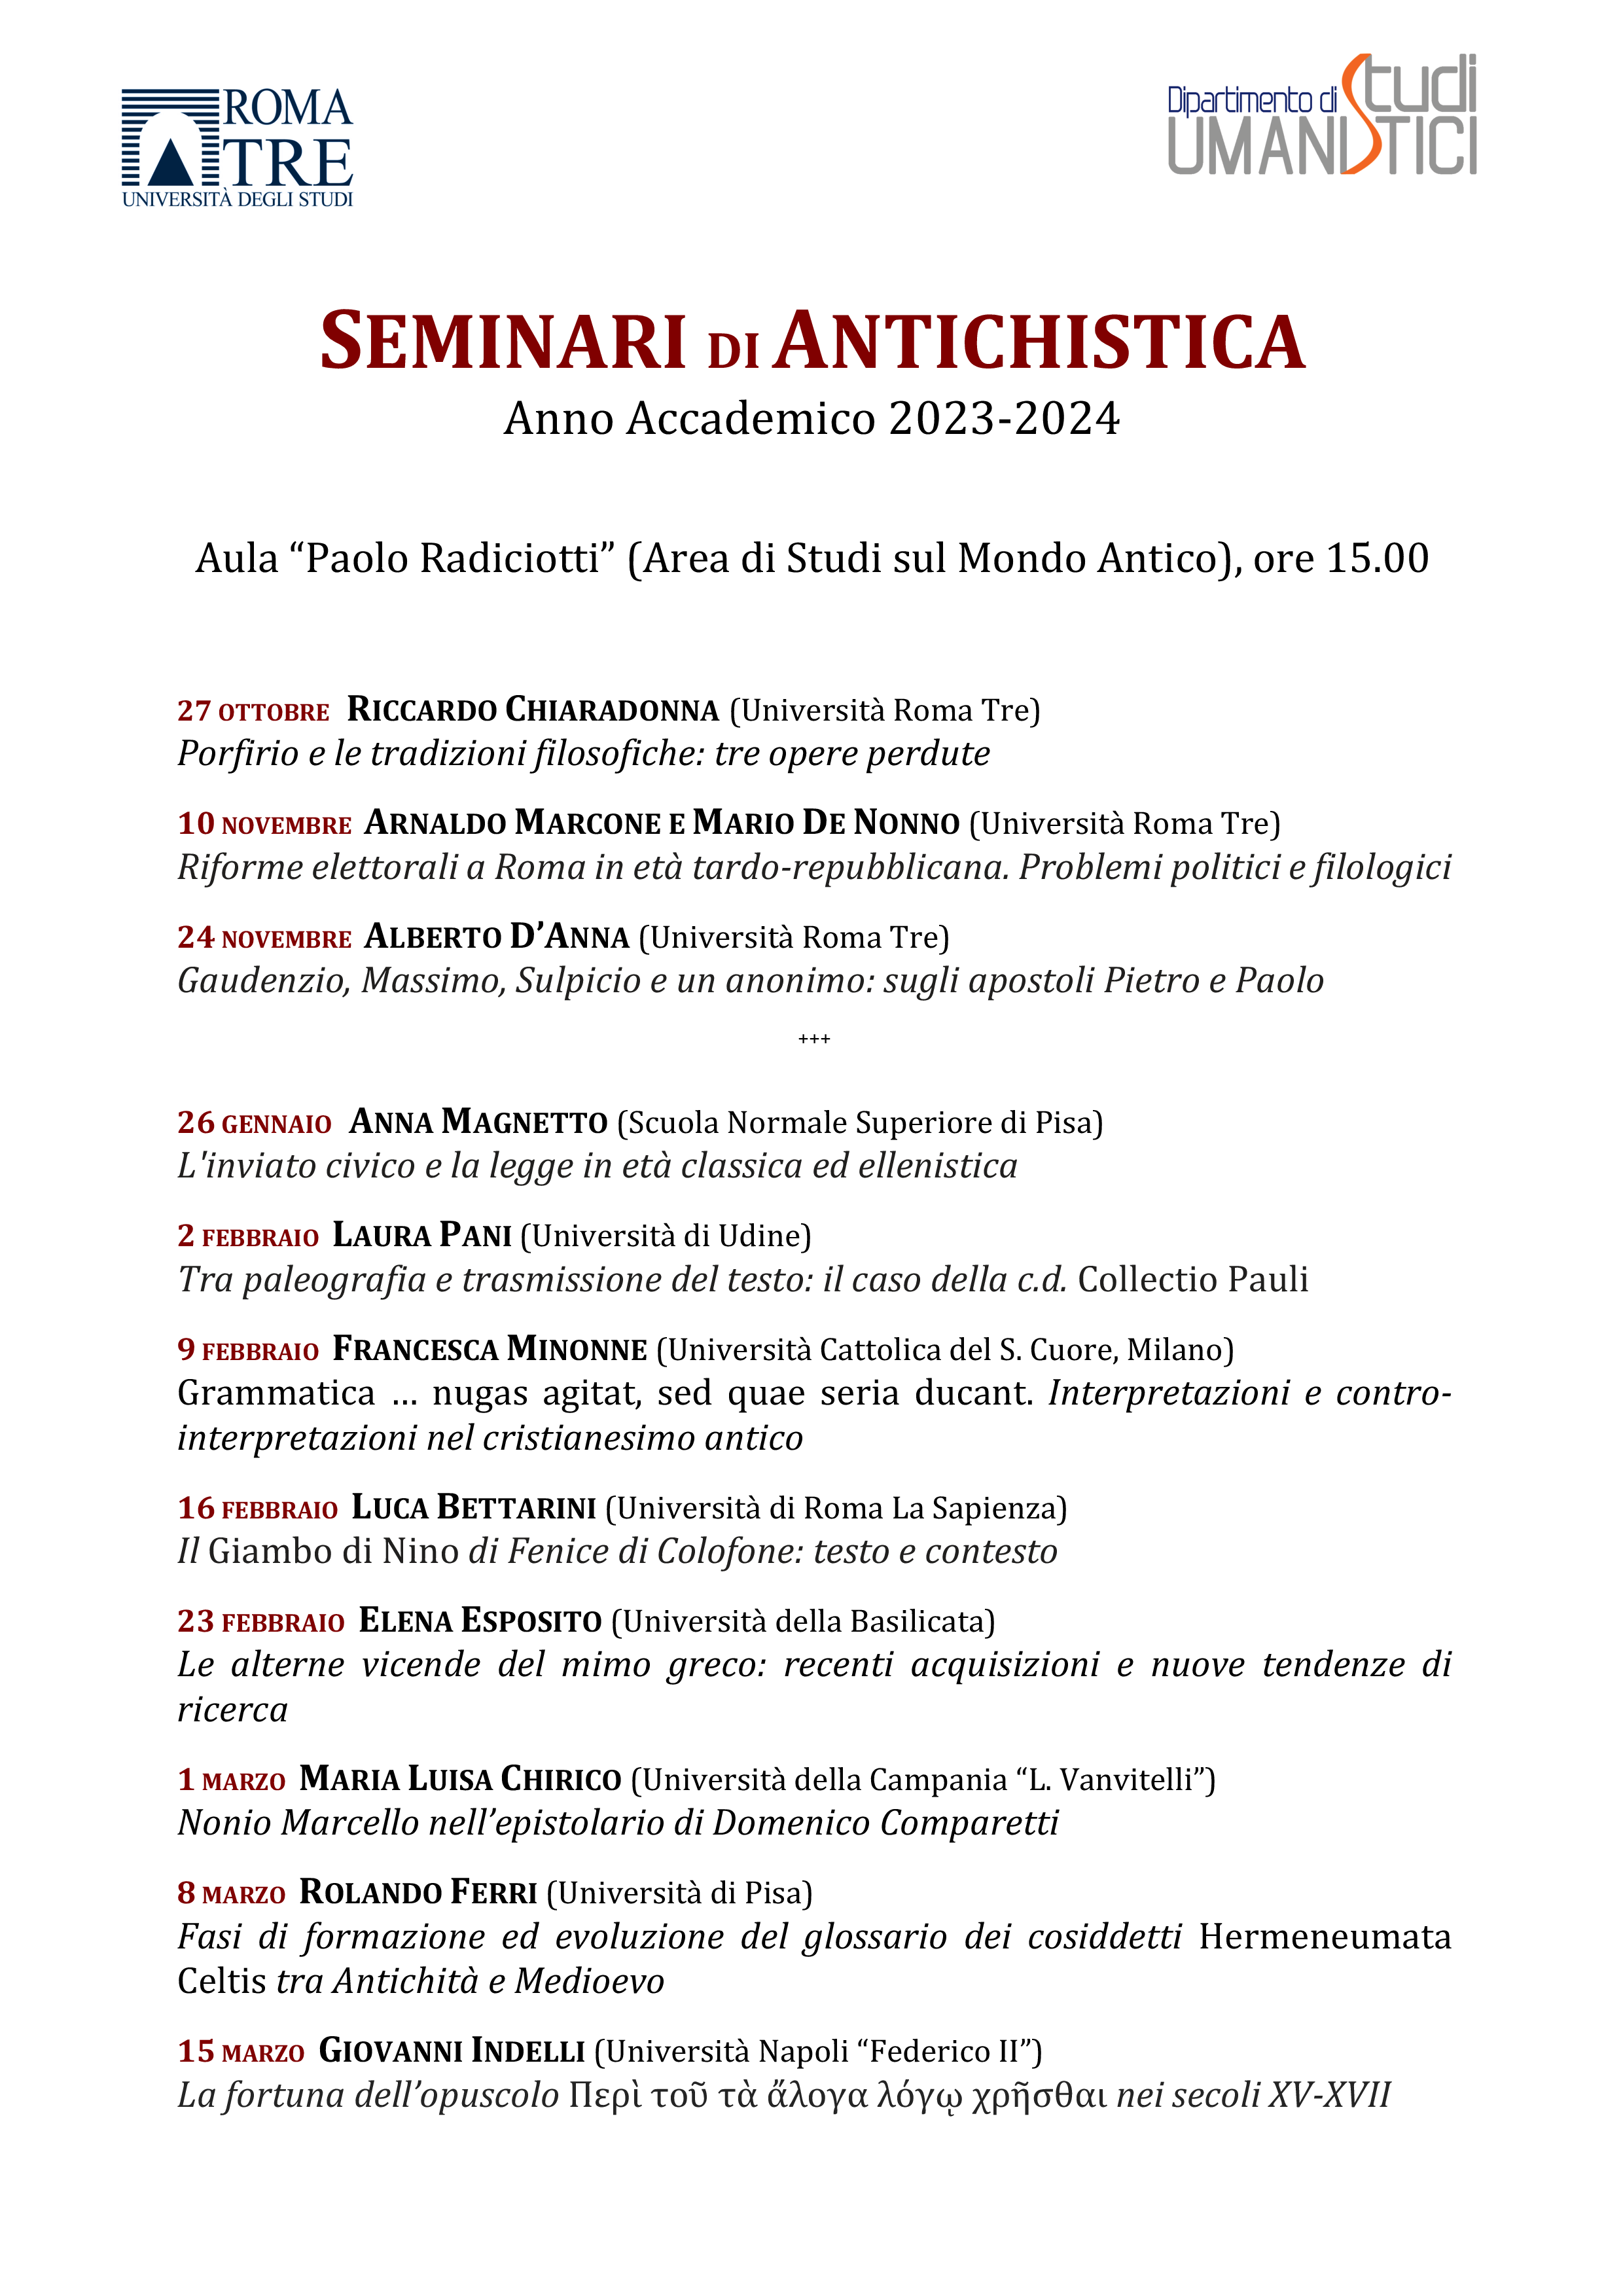 Poster for the Seminars on Antiquity at Roma Tre